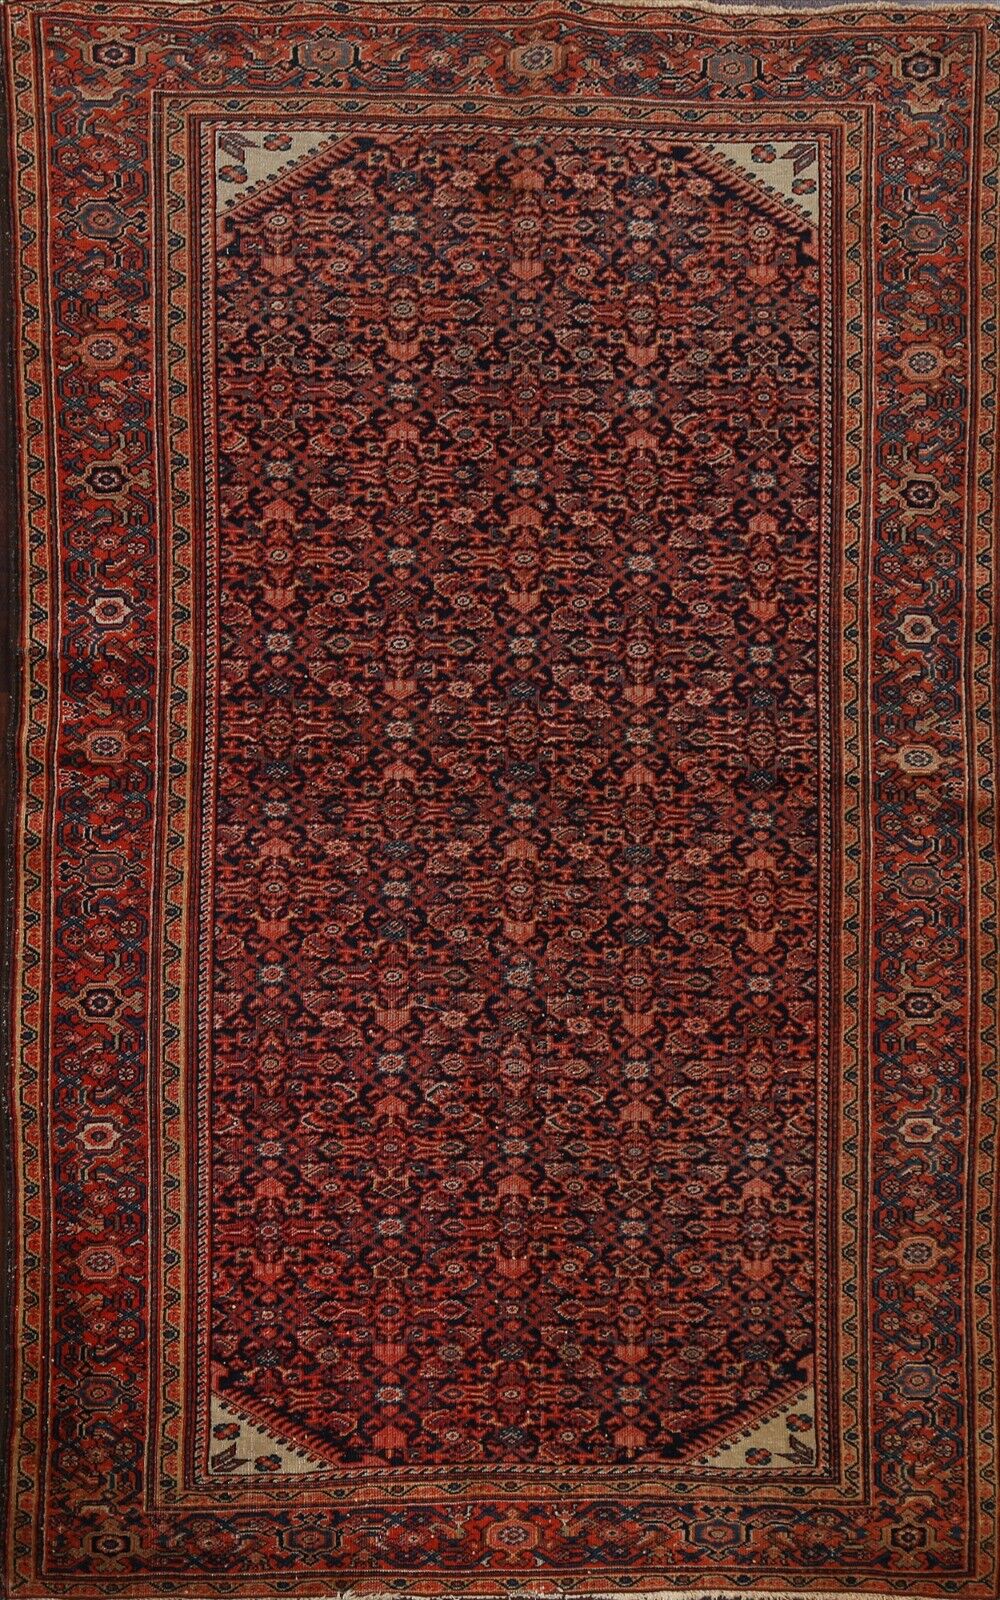 Pre-1900 Antique Geometric Traditional Oriental Area Rug Hand-Knotted 4x7 Carpet